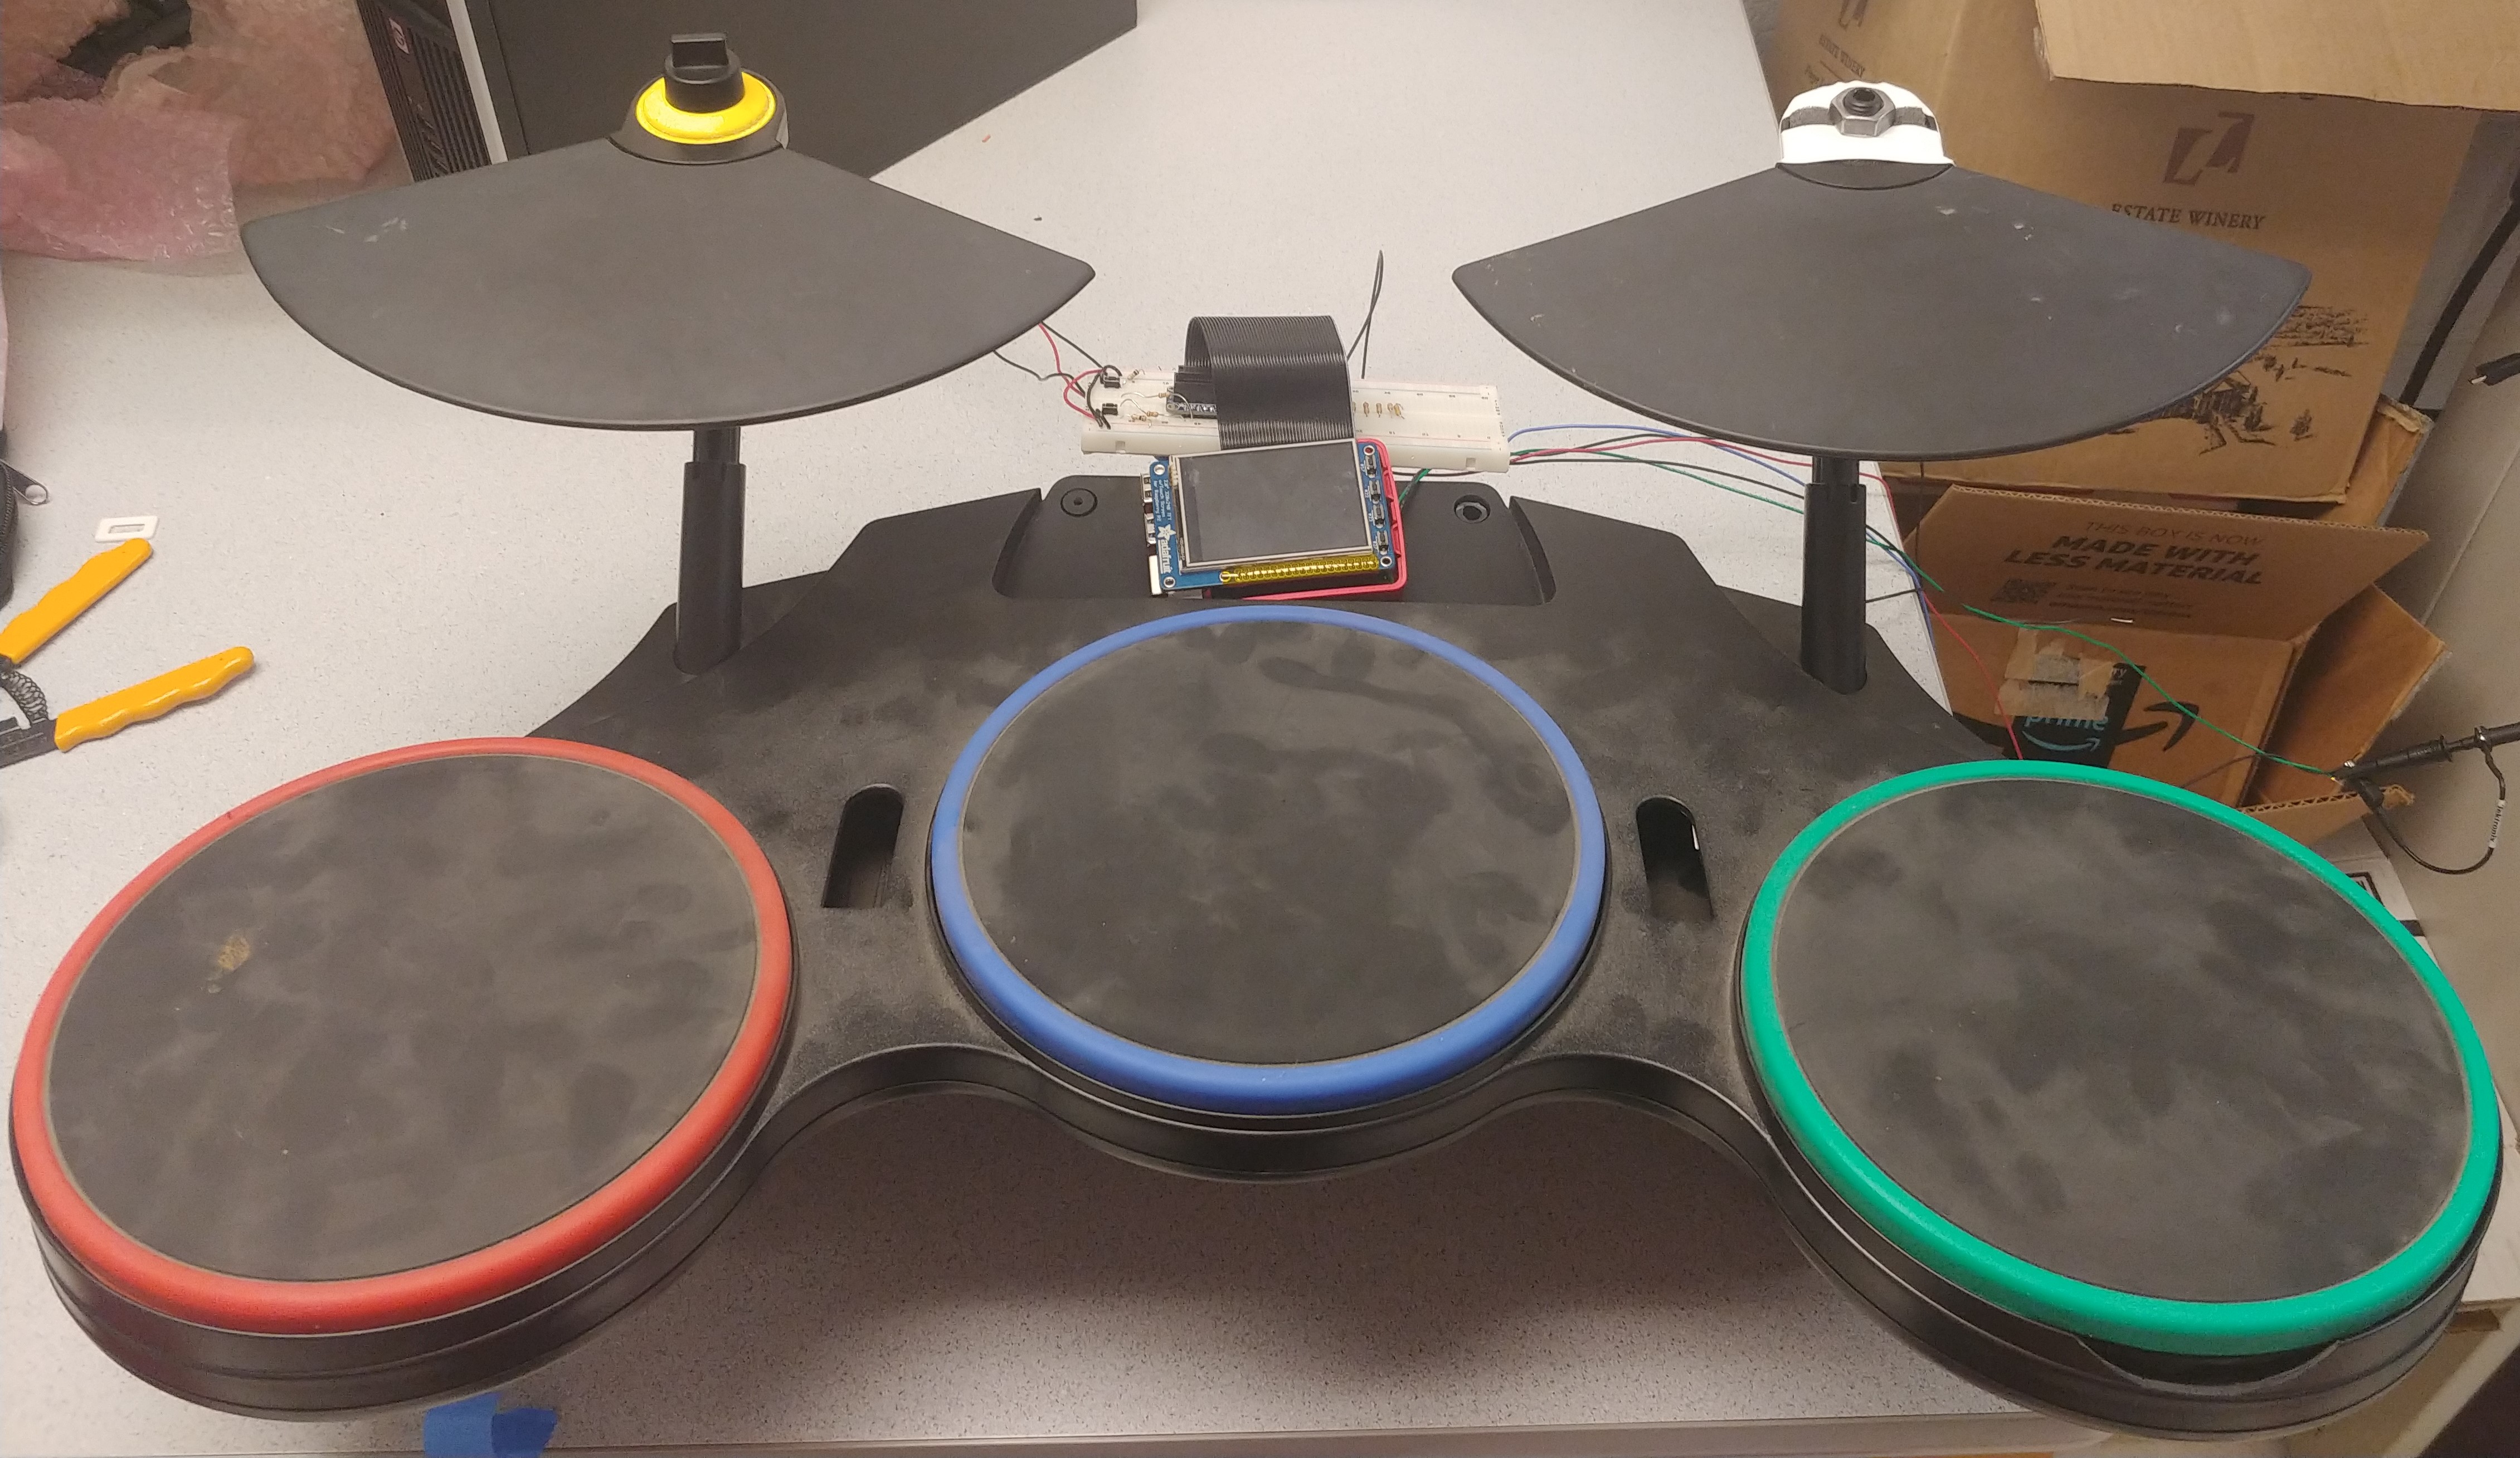 Drum pad with RPi in center, where the XBox controller was